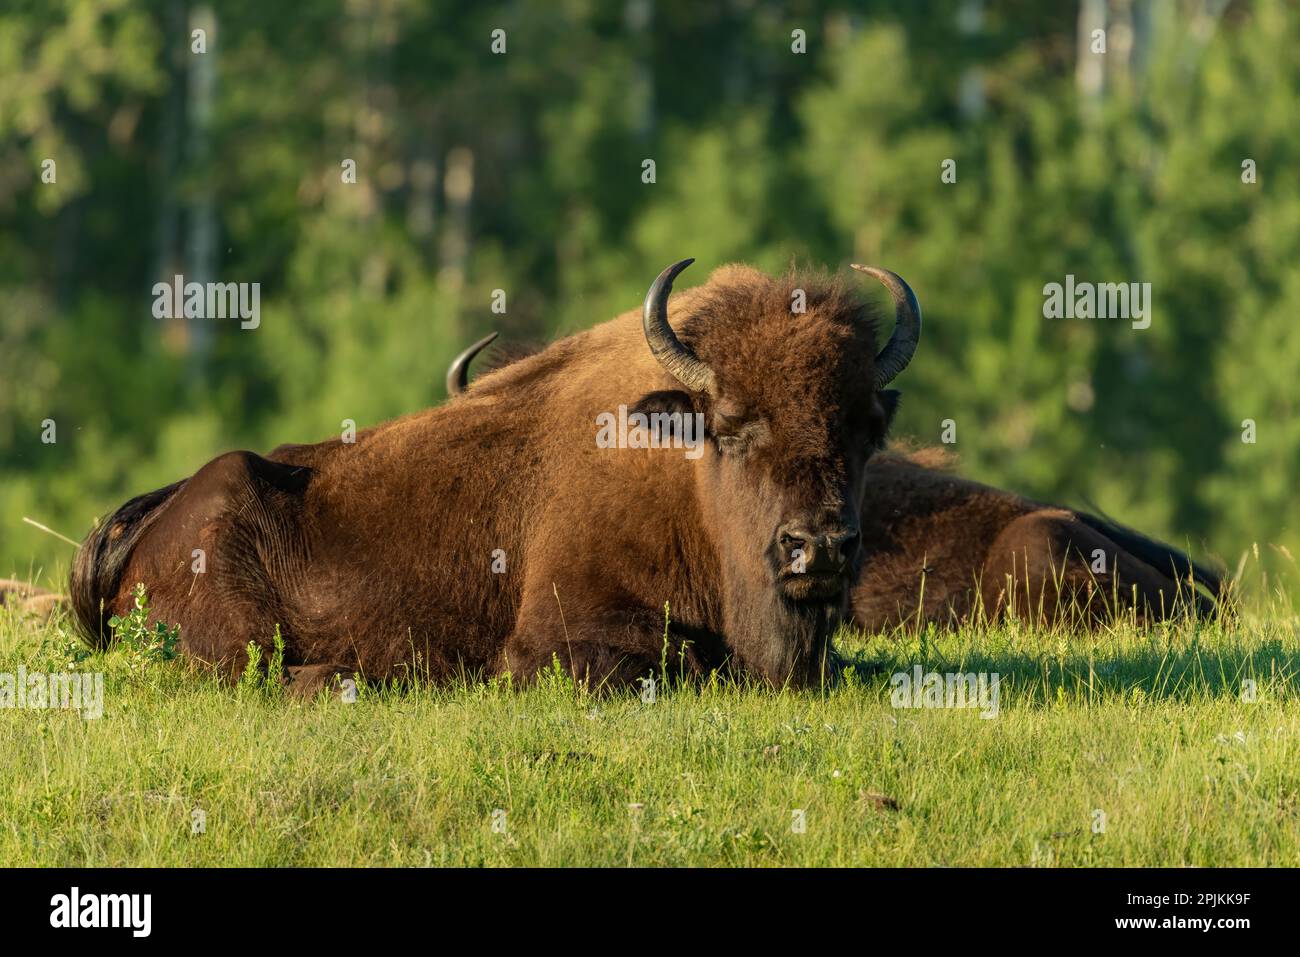 Canada, Manitoba, Riding Mountain National Park. Plains bison adults resting in grass. Stock Photo